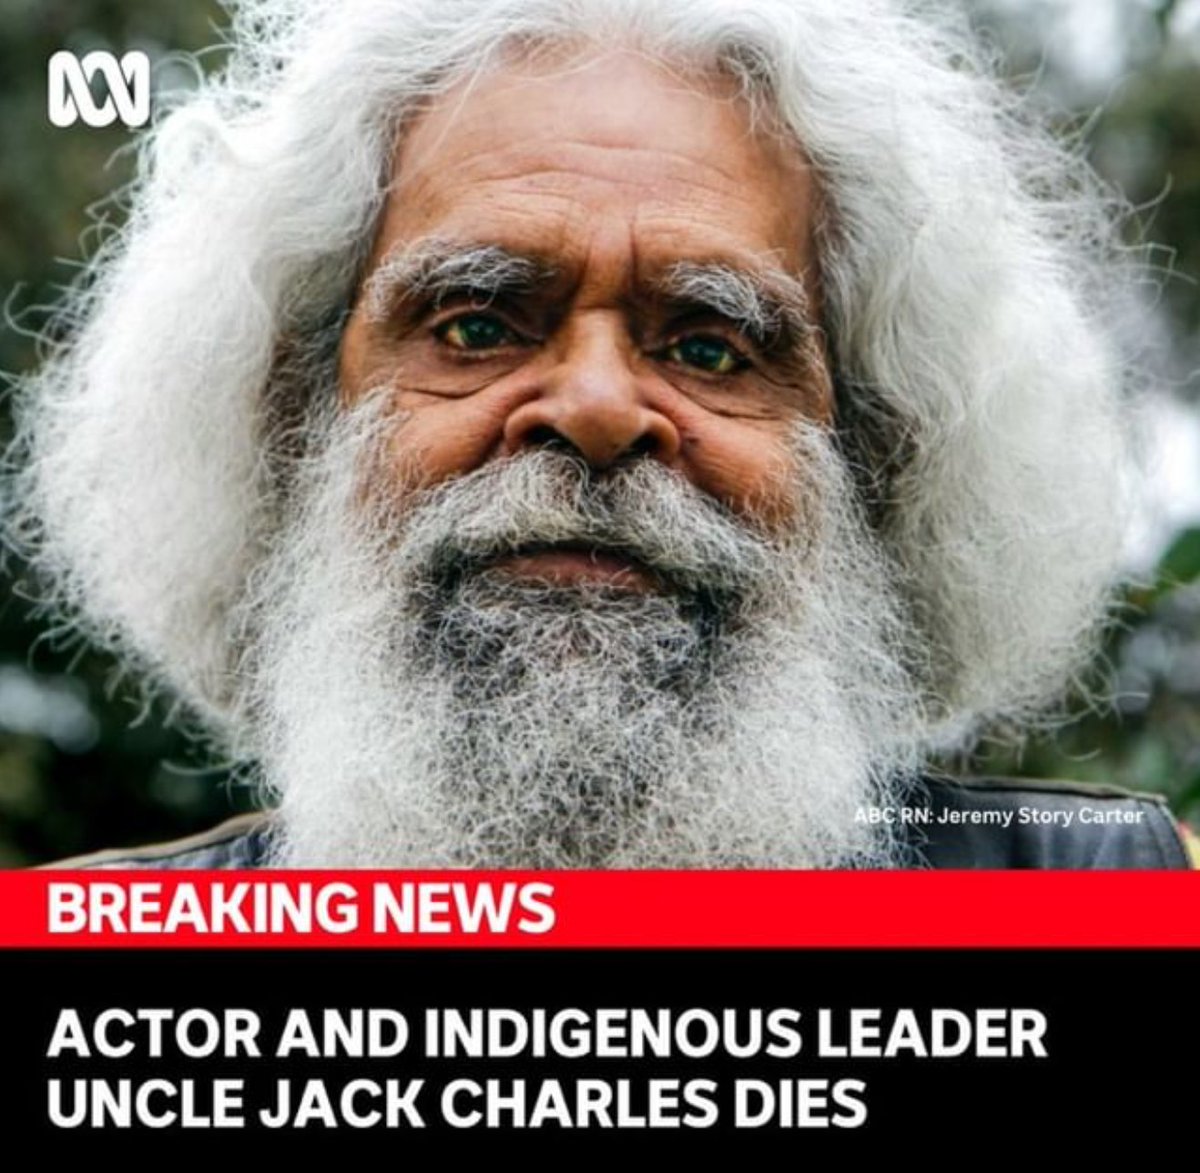 Actor, author and revered Victorian Aboriginal Elder Uncle Jack Charles has died age 79. NOTE: This story uses Uncle Jack Charles's name and image with the permission of his family.